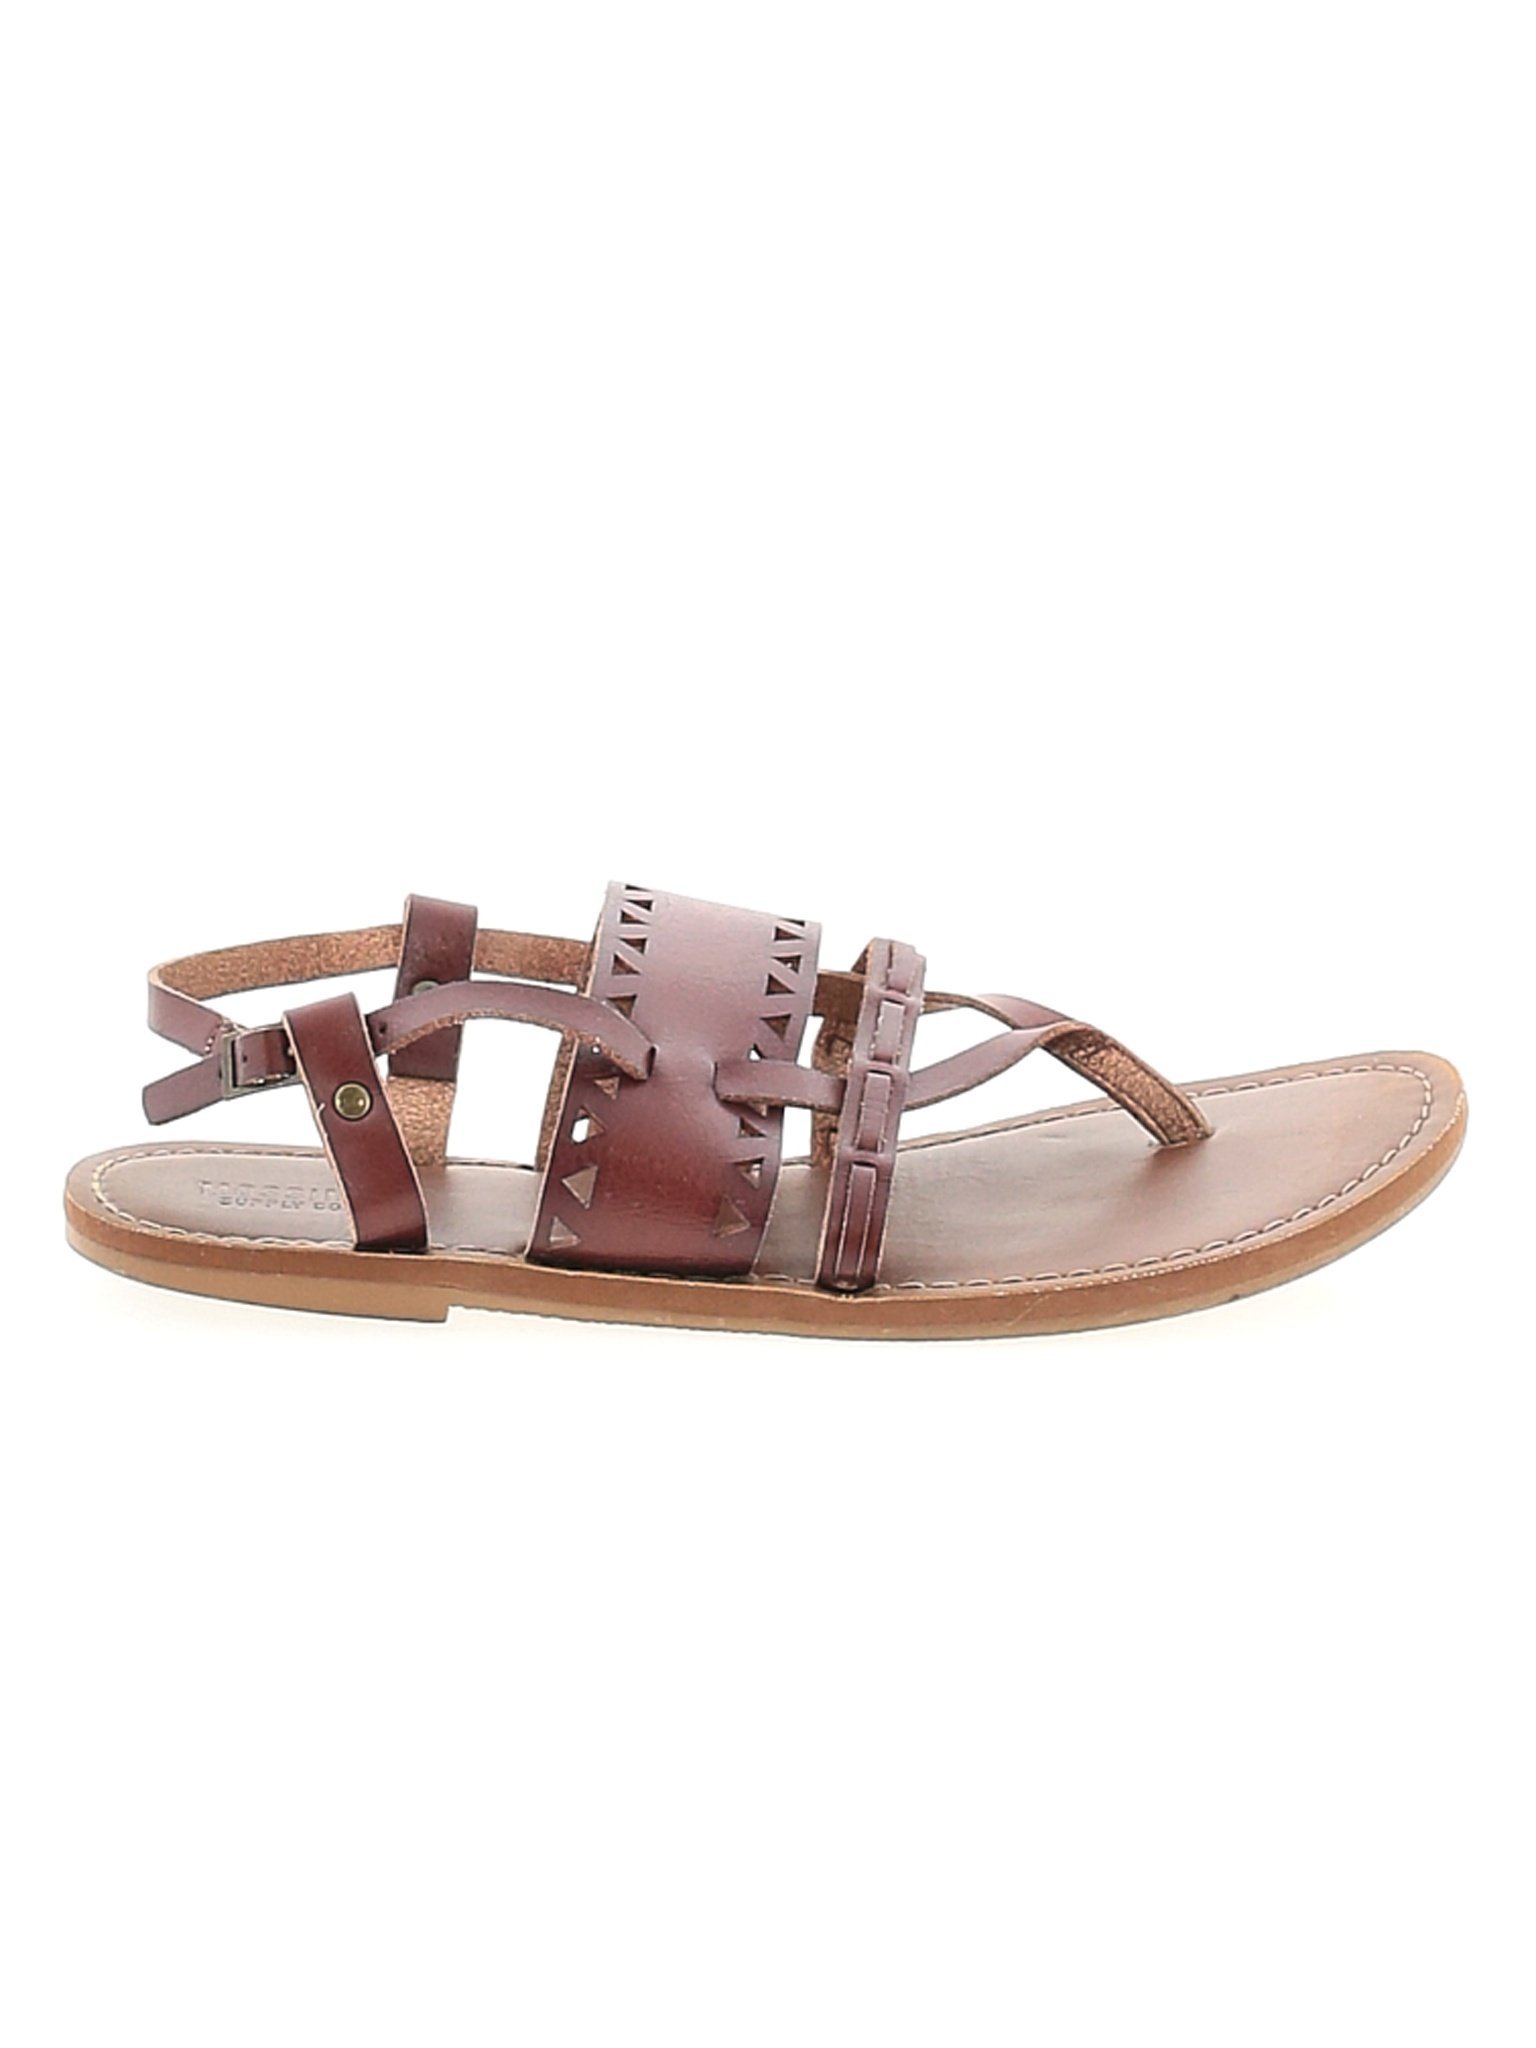 Mossimo Supply Co. Women Brown Sandals US 6 | eBay